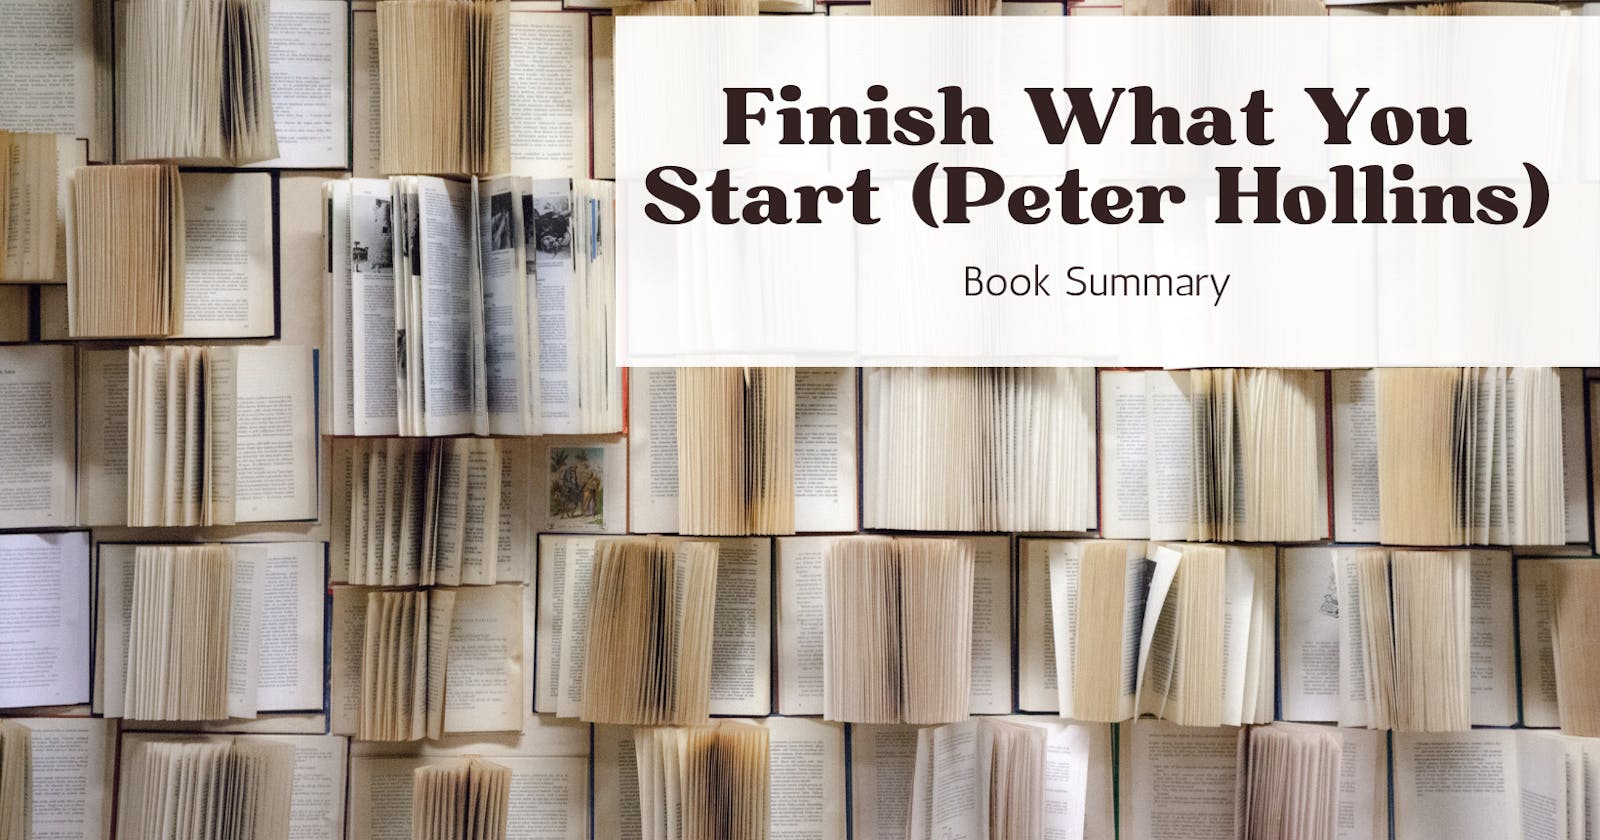 Book Summary: Finish What You Start (Peter Hollins)